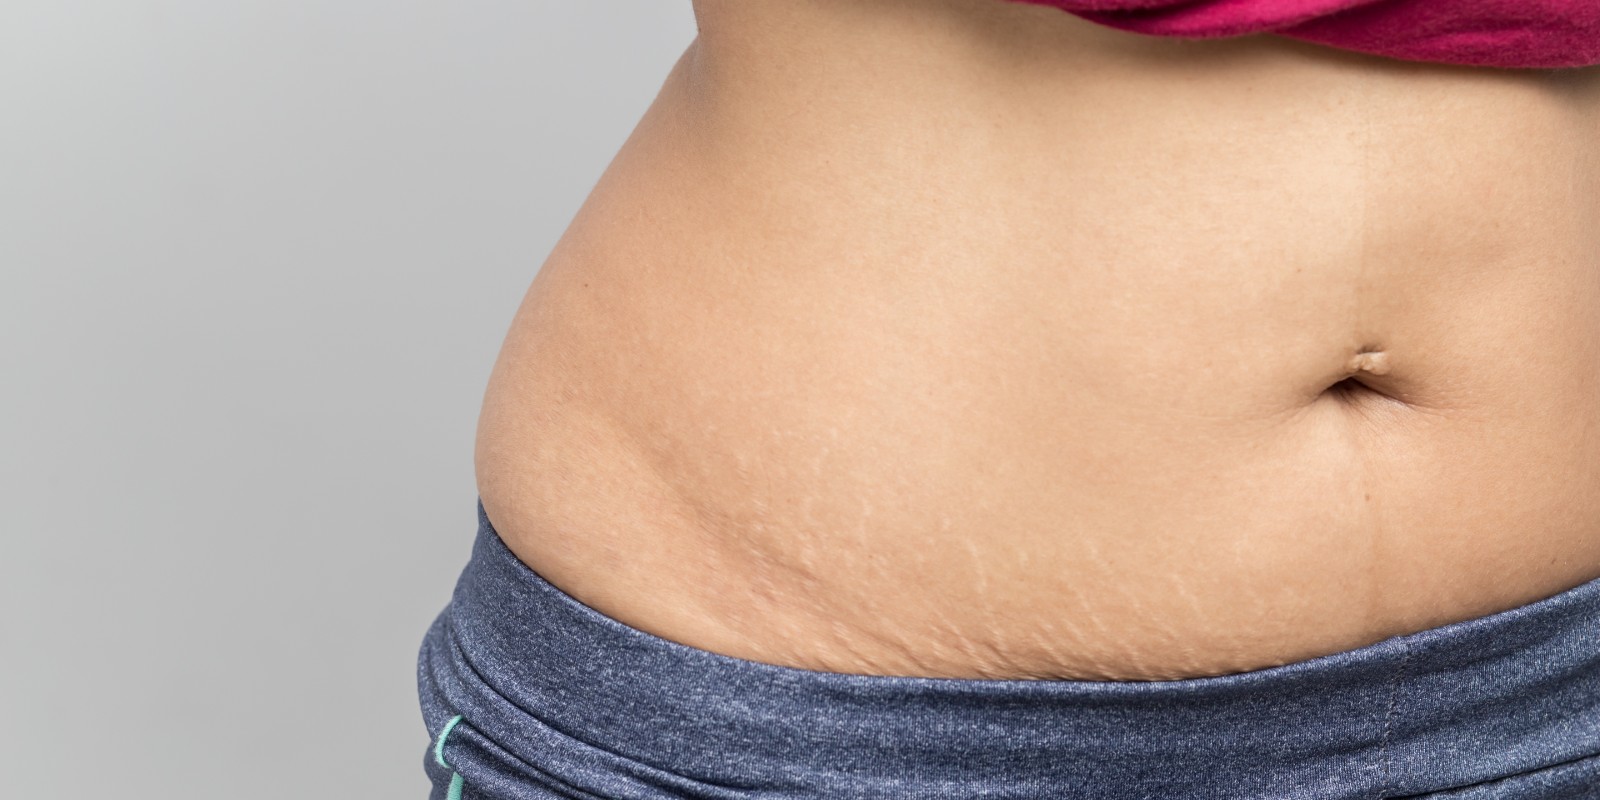 Tummy Tuck after Pregnancy